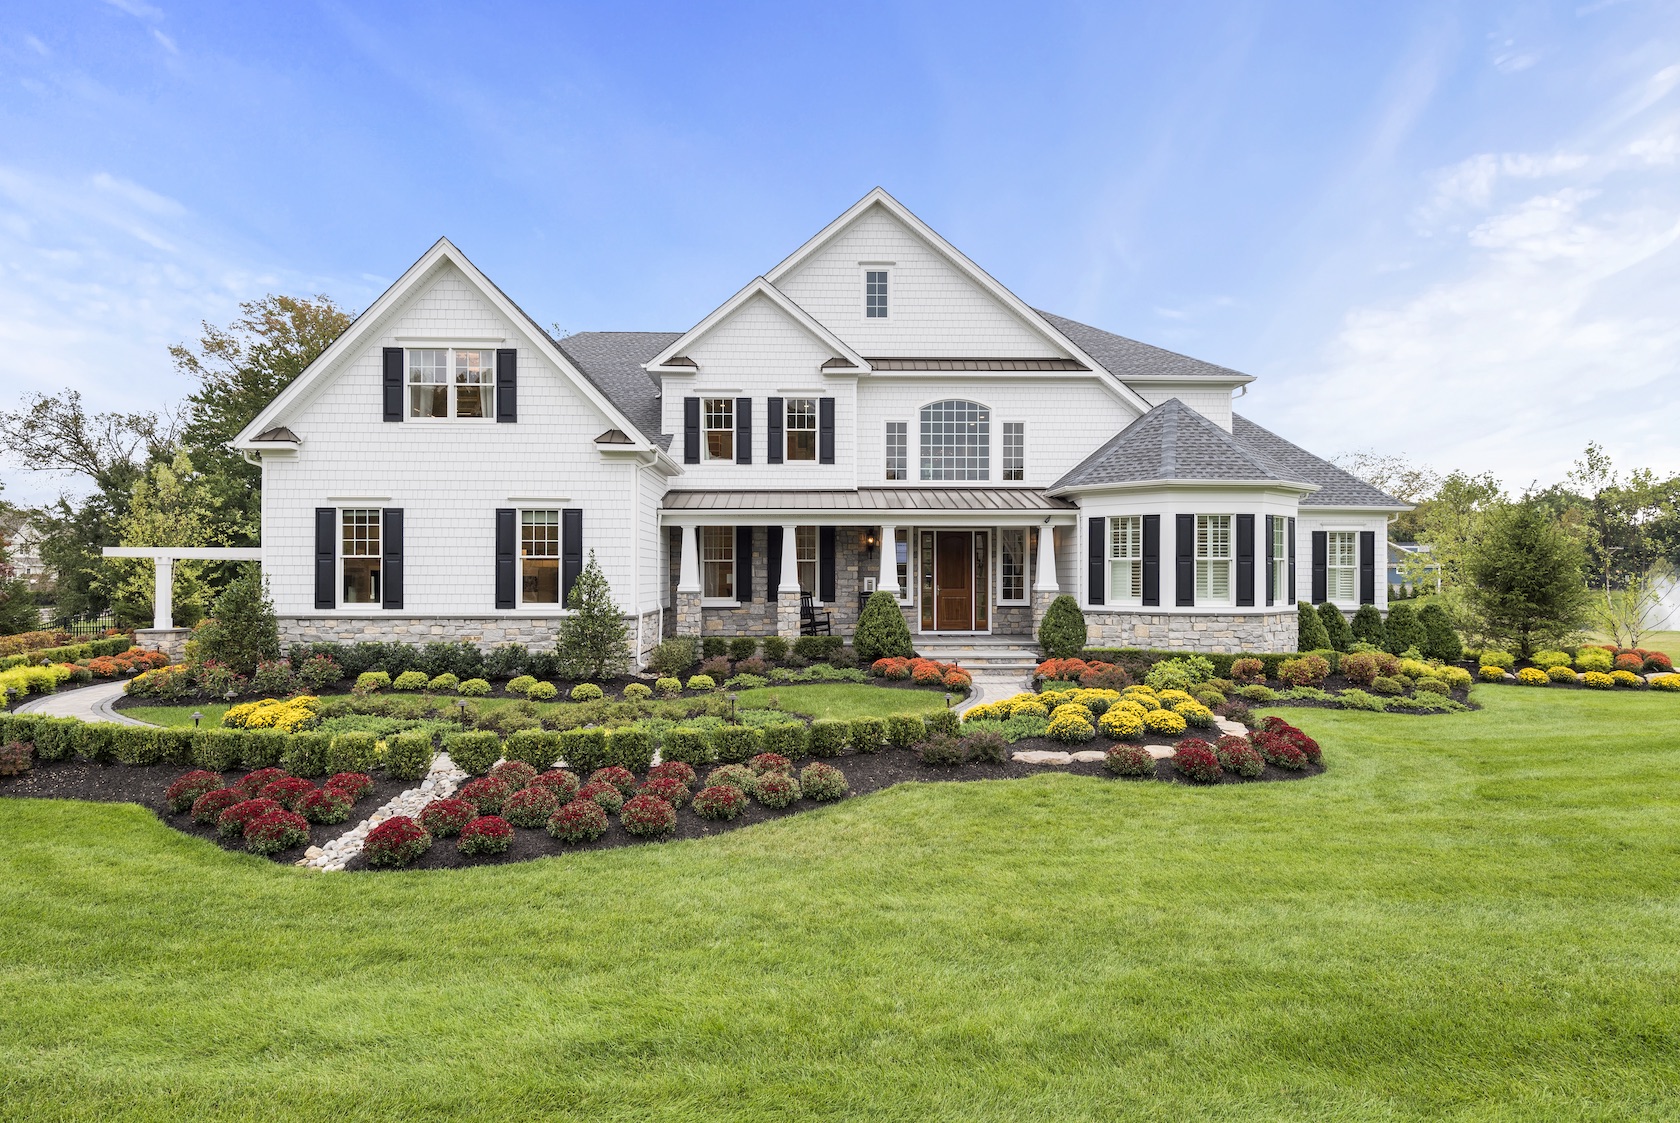 Exterior of new home with landscaping in New Jersey.